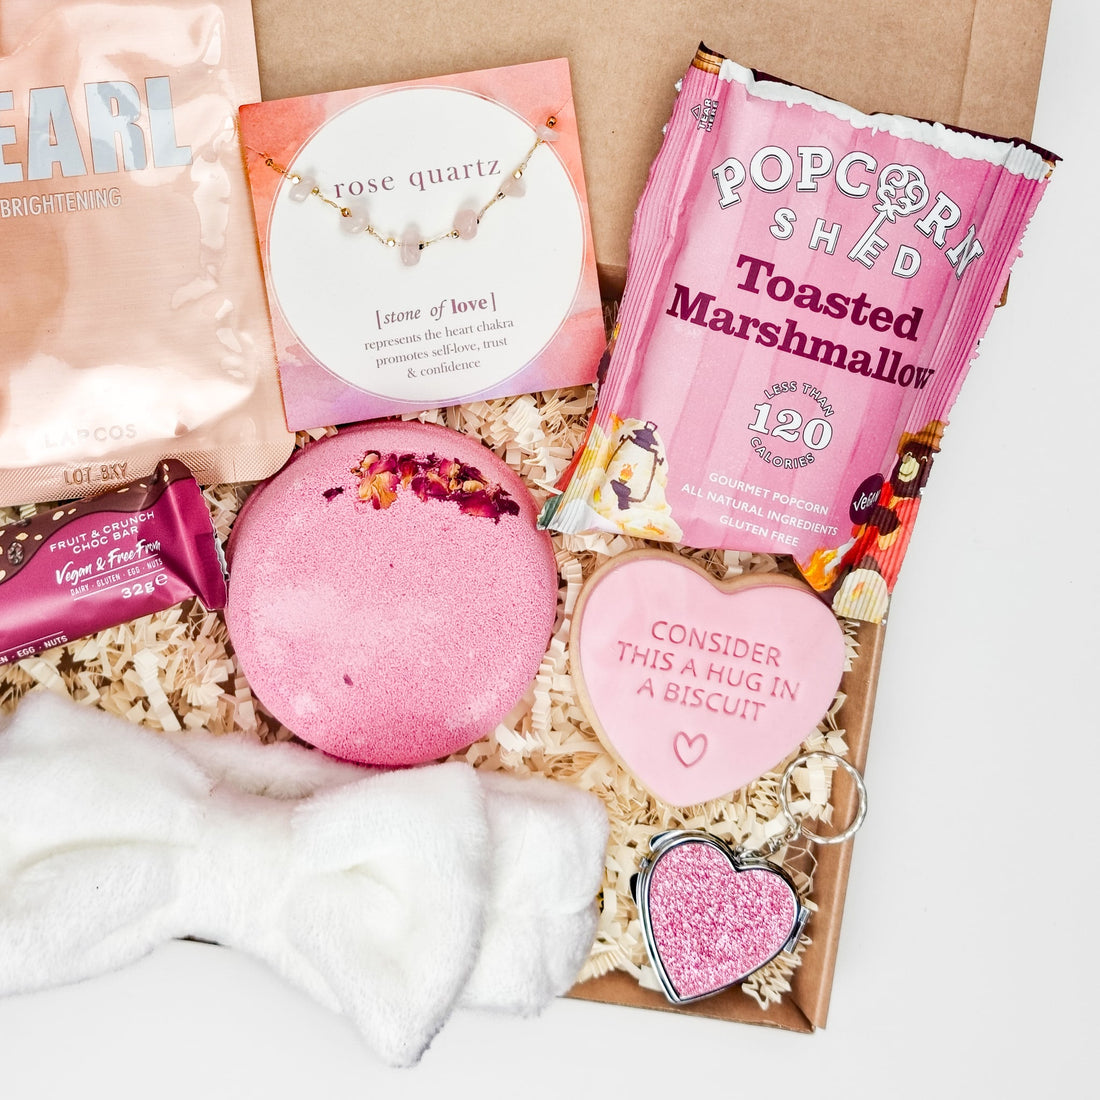 A gift box for her with a LAPCOS PEARL brightening face mask, rose quartz bracelet symbolizing love, a heart-shaped jewel keyring mirror, and toasted marshmallow gourmet popcorn.